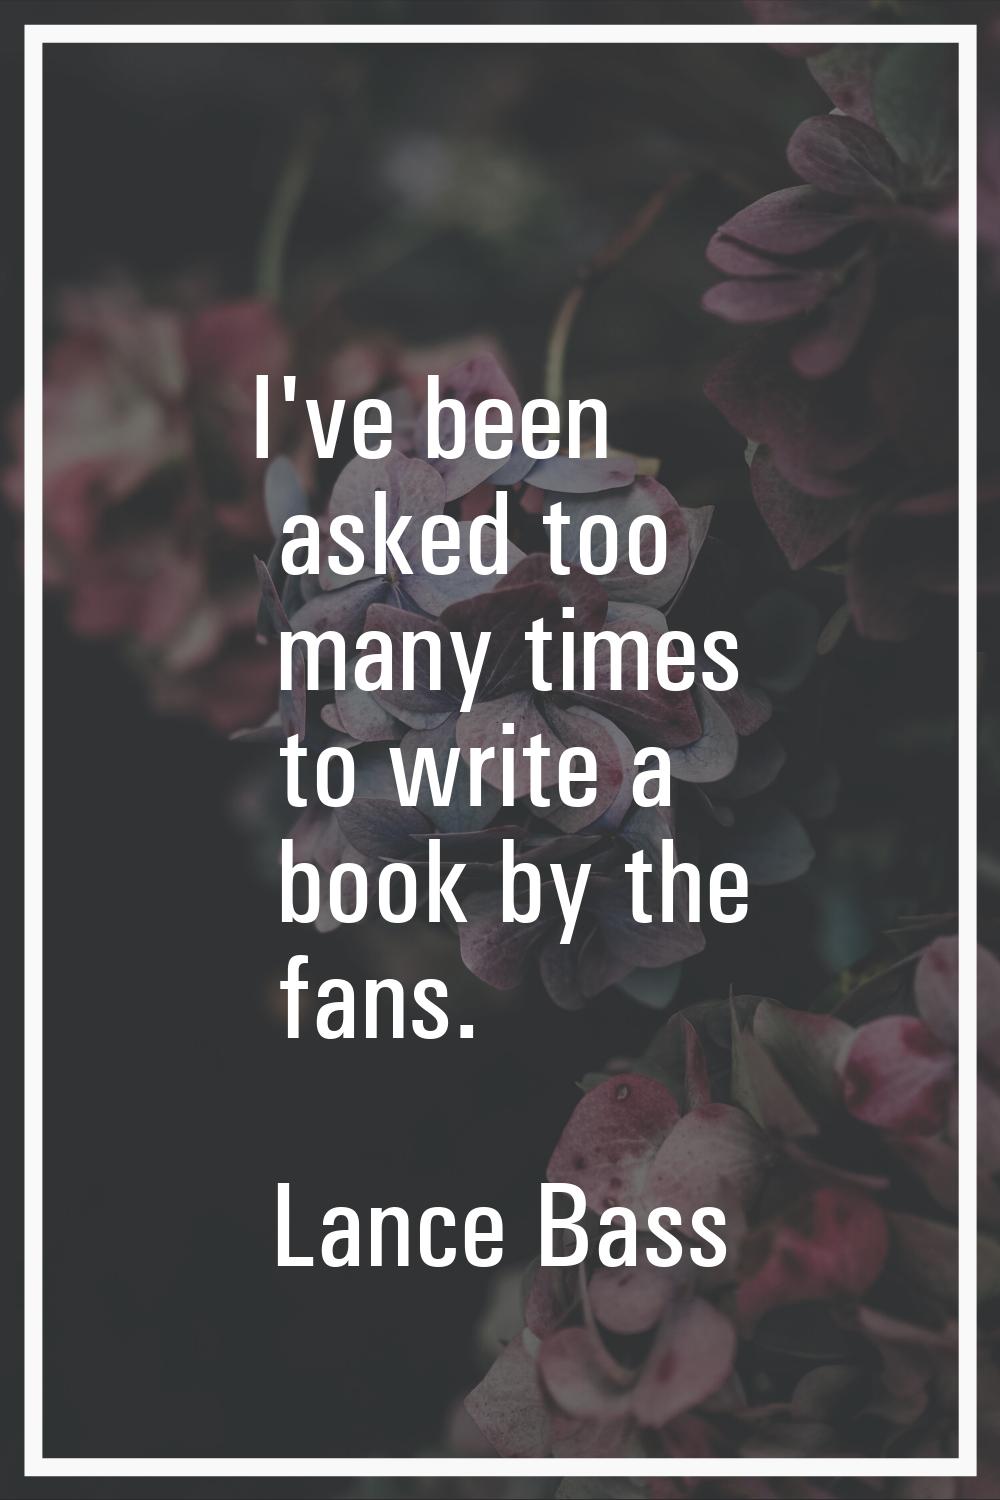 I've been asked too many times to write a book by the fans.